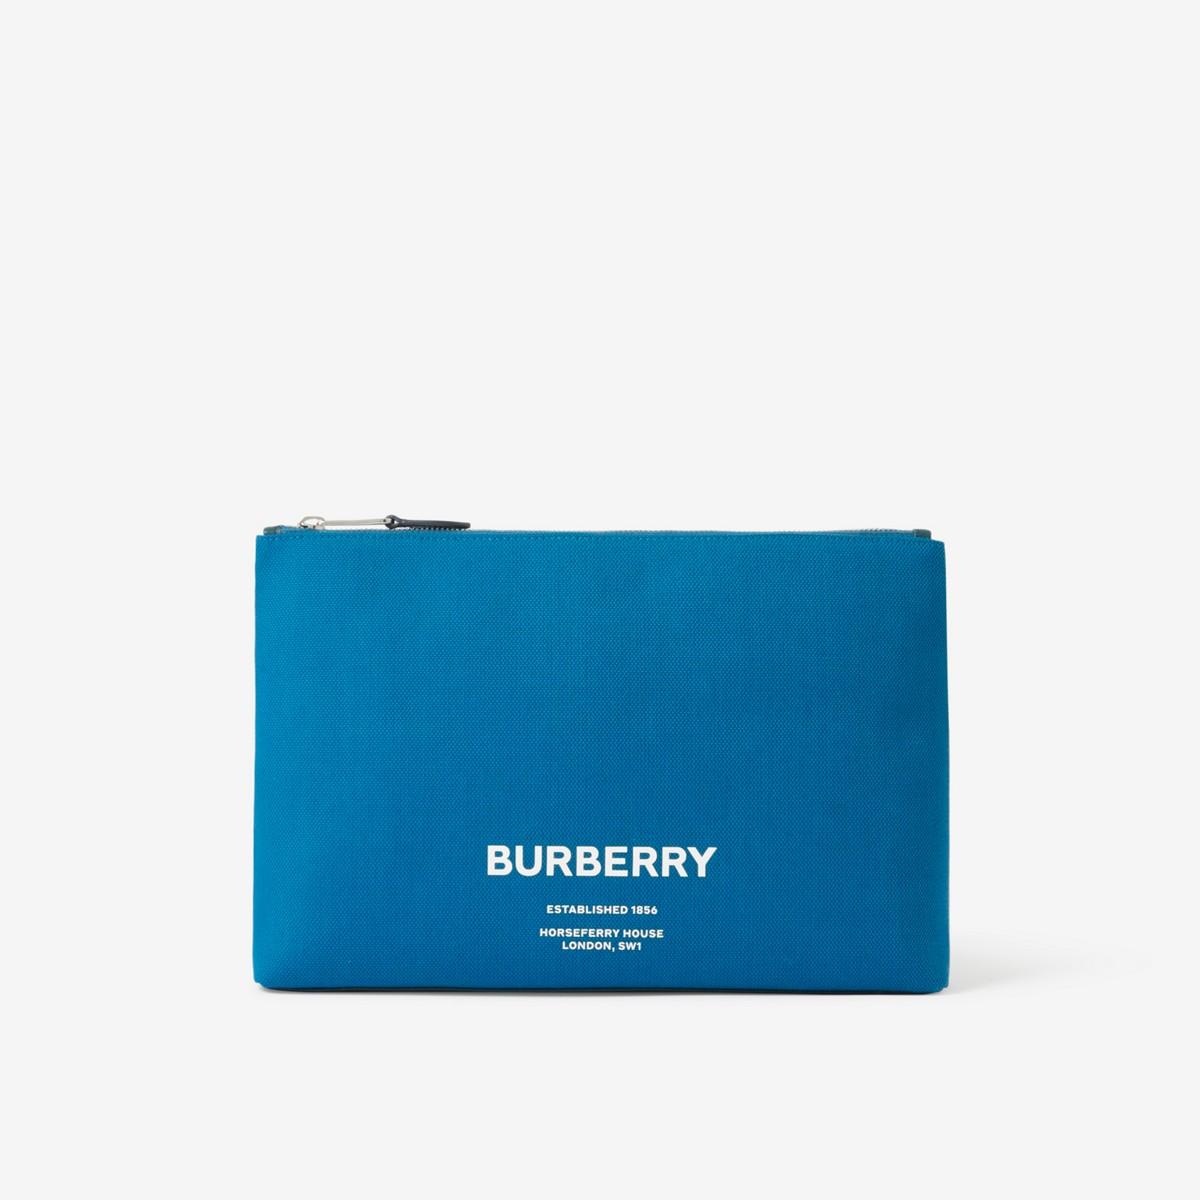 Burberry Horseferry Print Canvas And Leather Zip Pouch for Men